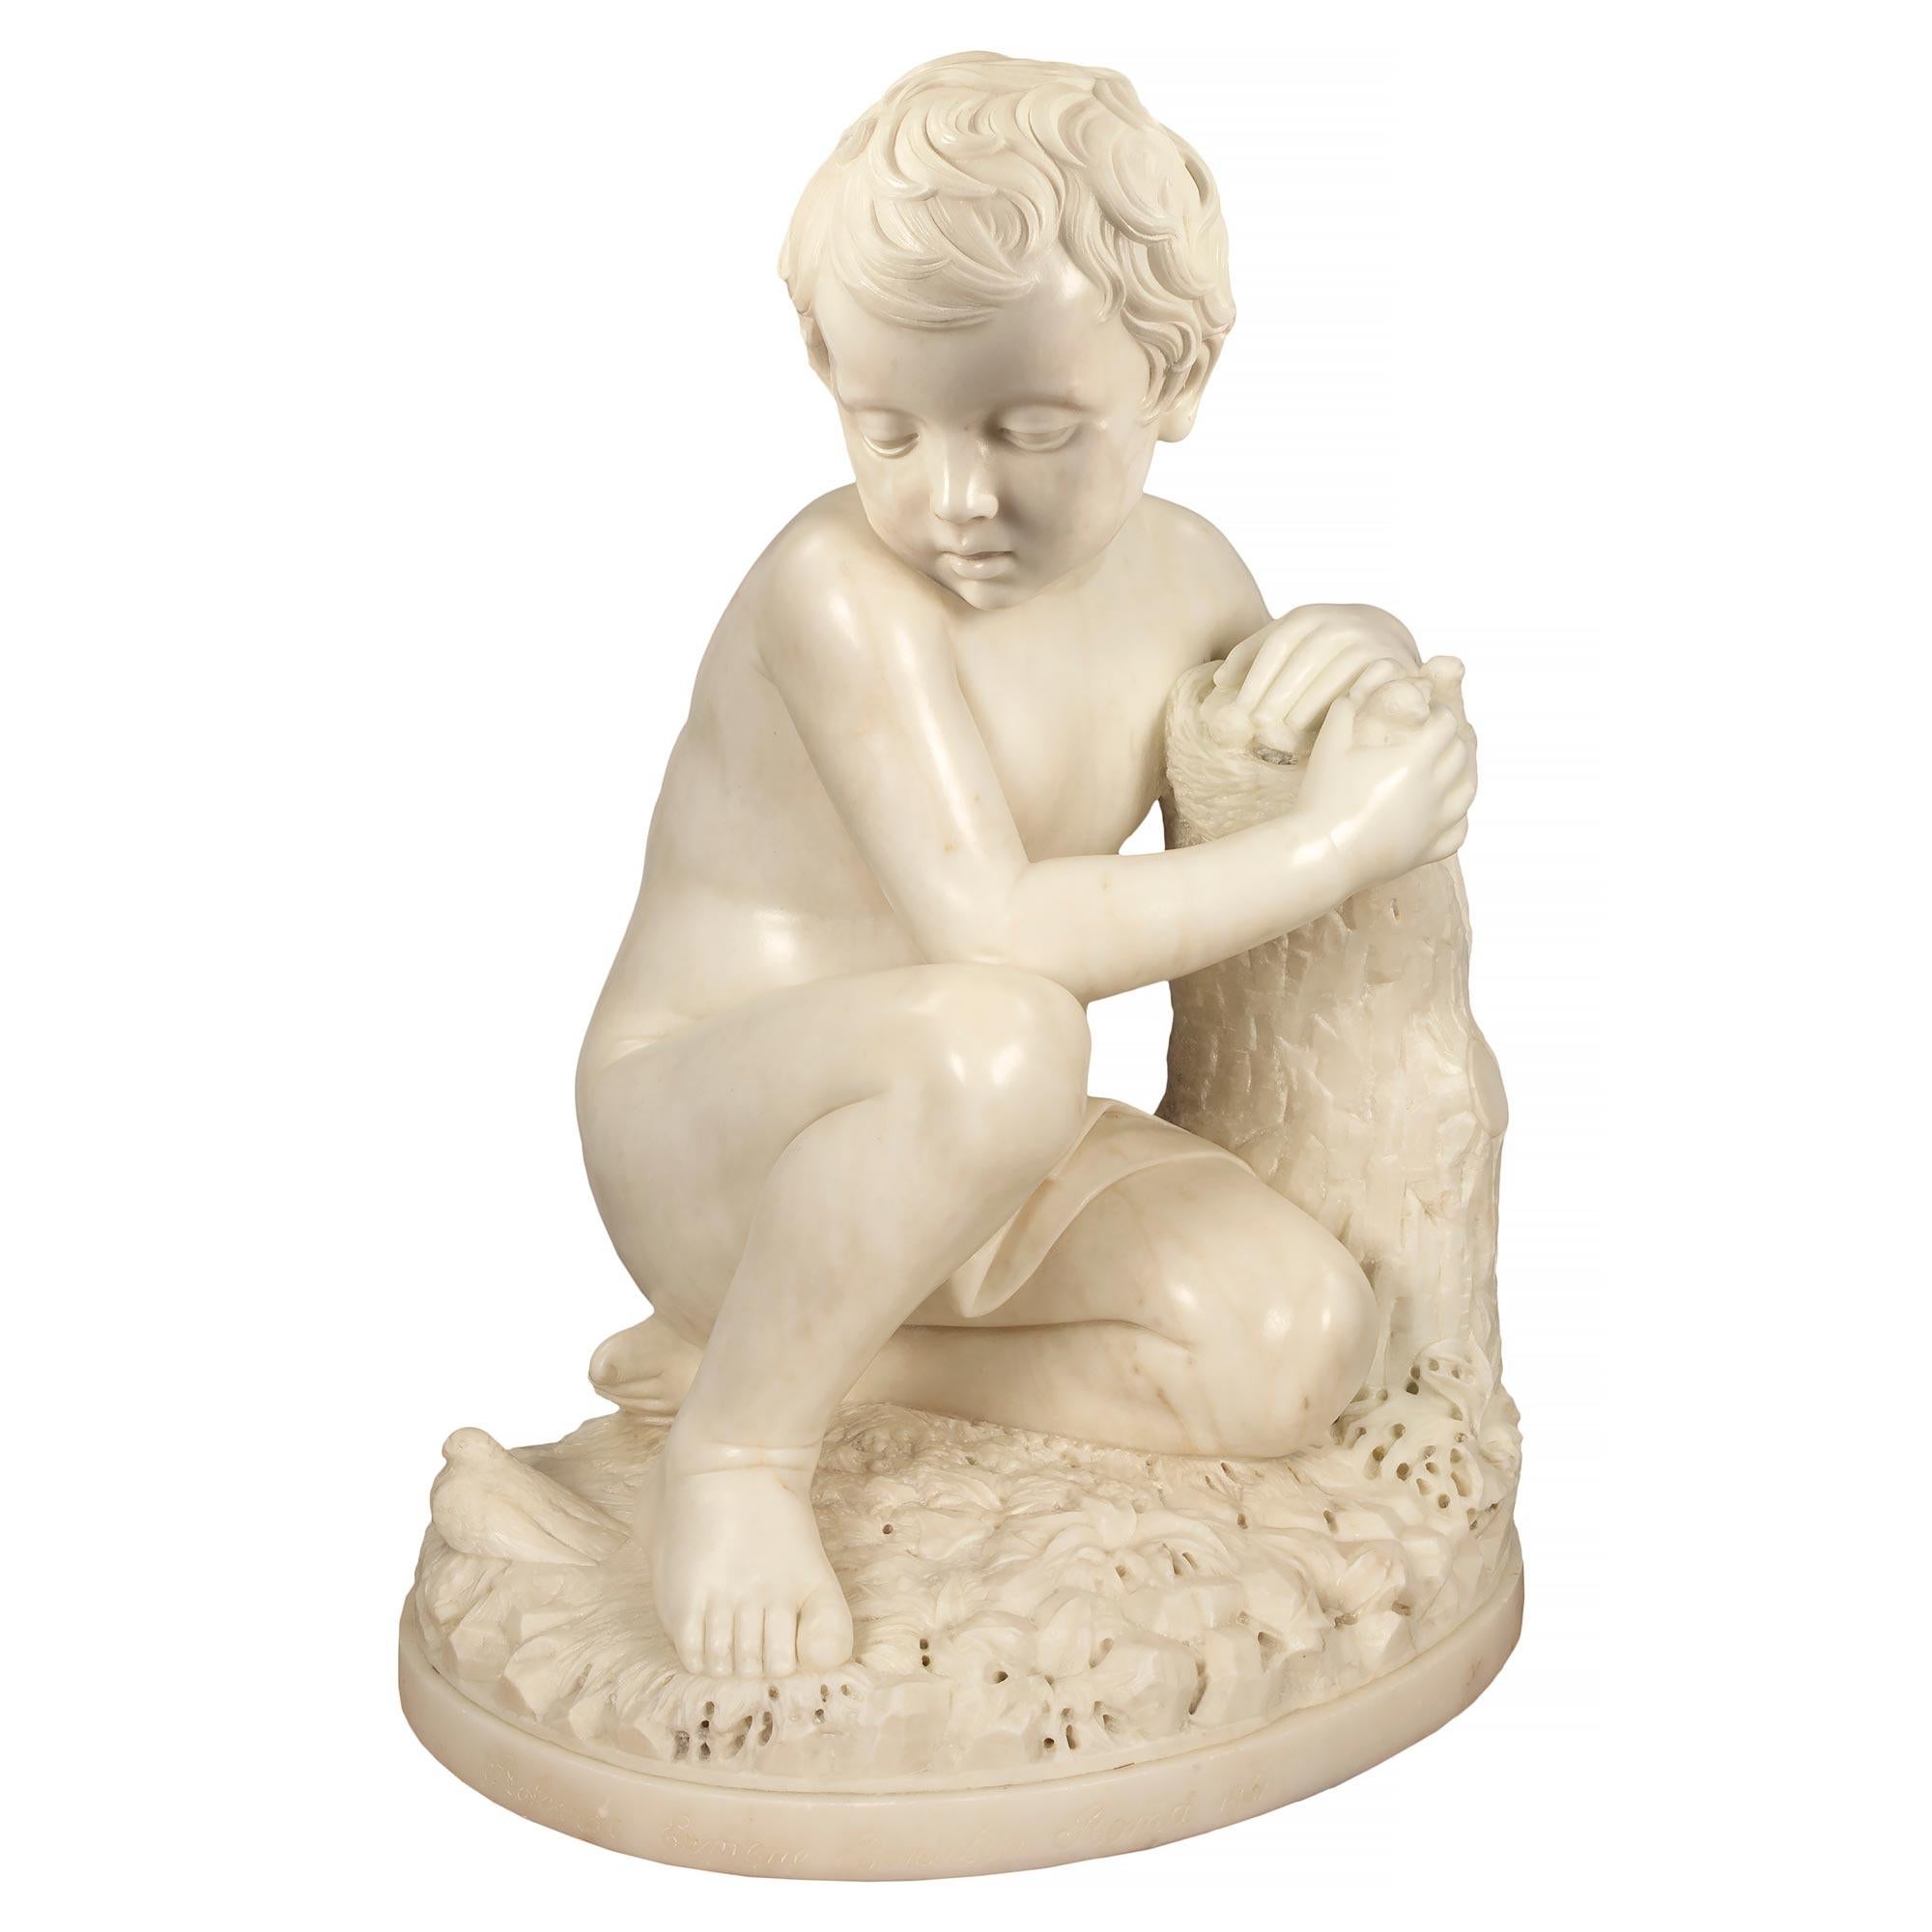 A striking Italian 19th century white Carrara marble statue of a young boy sitting next to a tree trunk signed Professore Eumene Baratta Roma 1861. The statue is raised by a circular base with a fine mottled border and a wonderfully executed rock